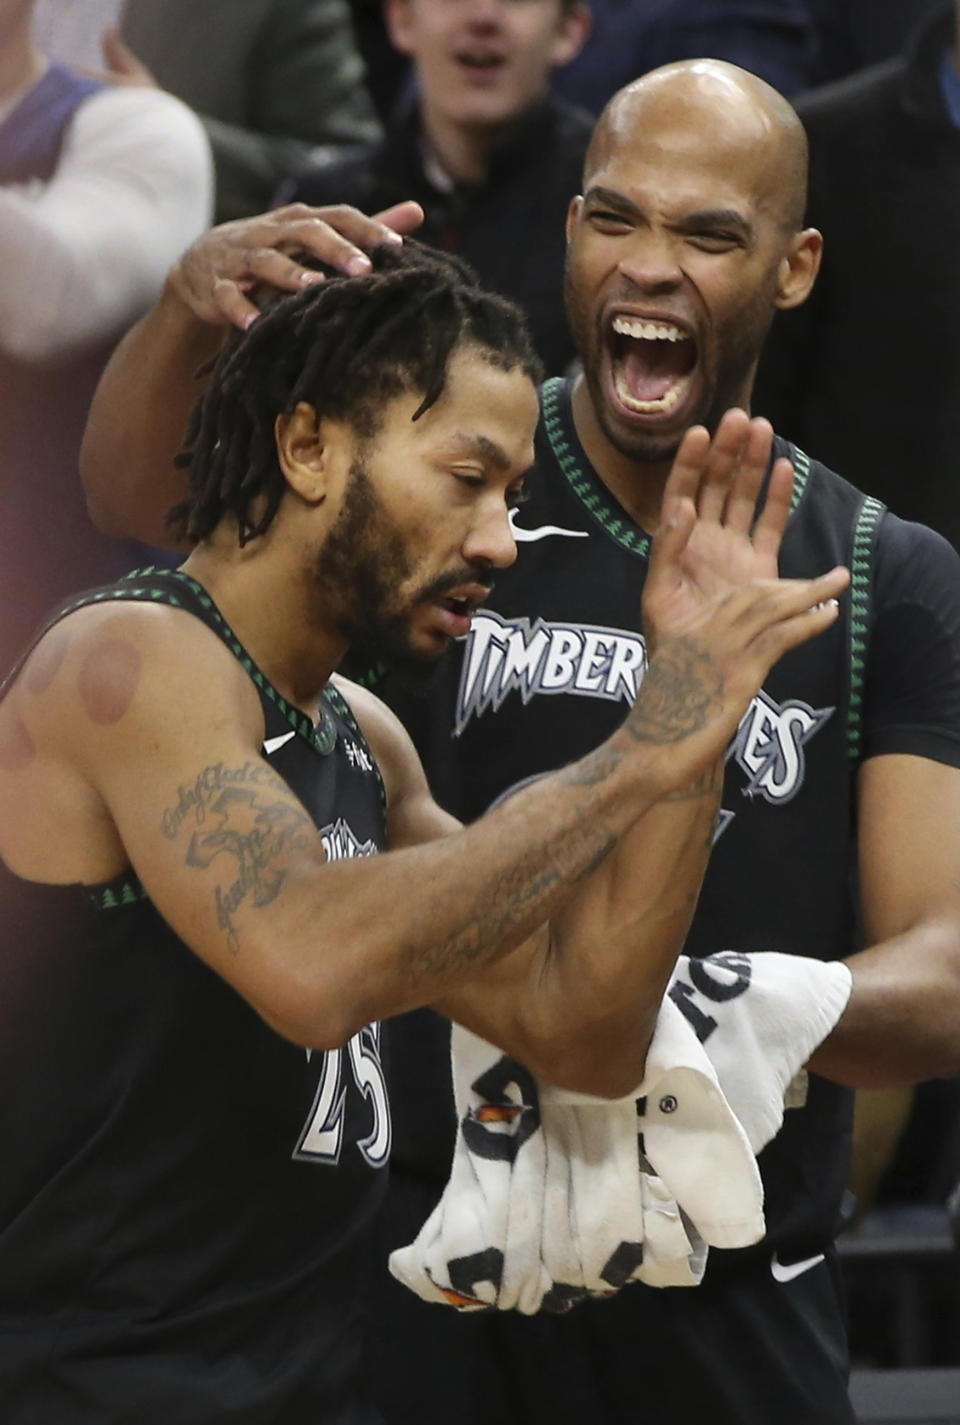 Minnesota Timberwolves' Taj Gibson, right congratulates Derrick Rose after the Timberwolves defeated the Utah Jazz 128-125 in an NBA basketball game Wednesday, Oct. 31, 2018, in Minneapolis. Rose had a career-high 50 points. (AP Photo/Jim Mone)